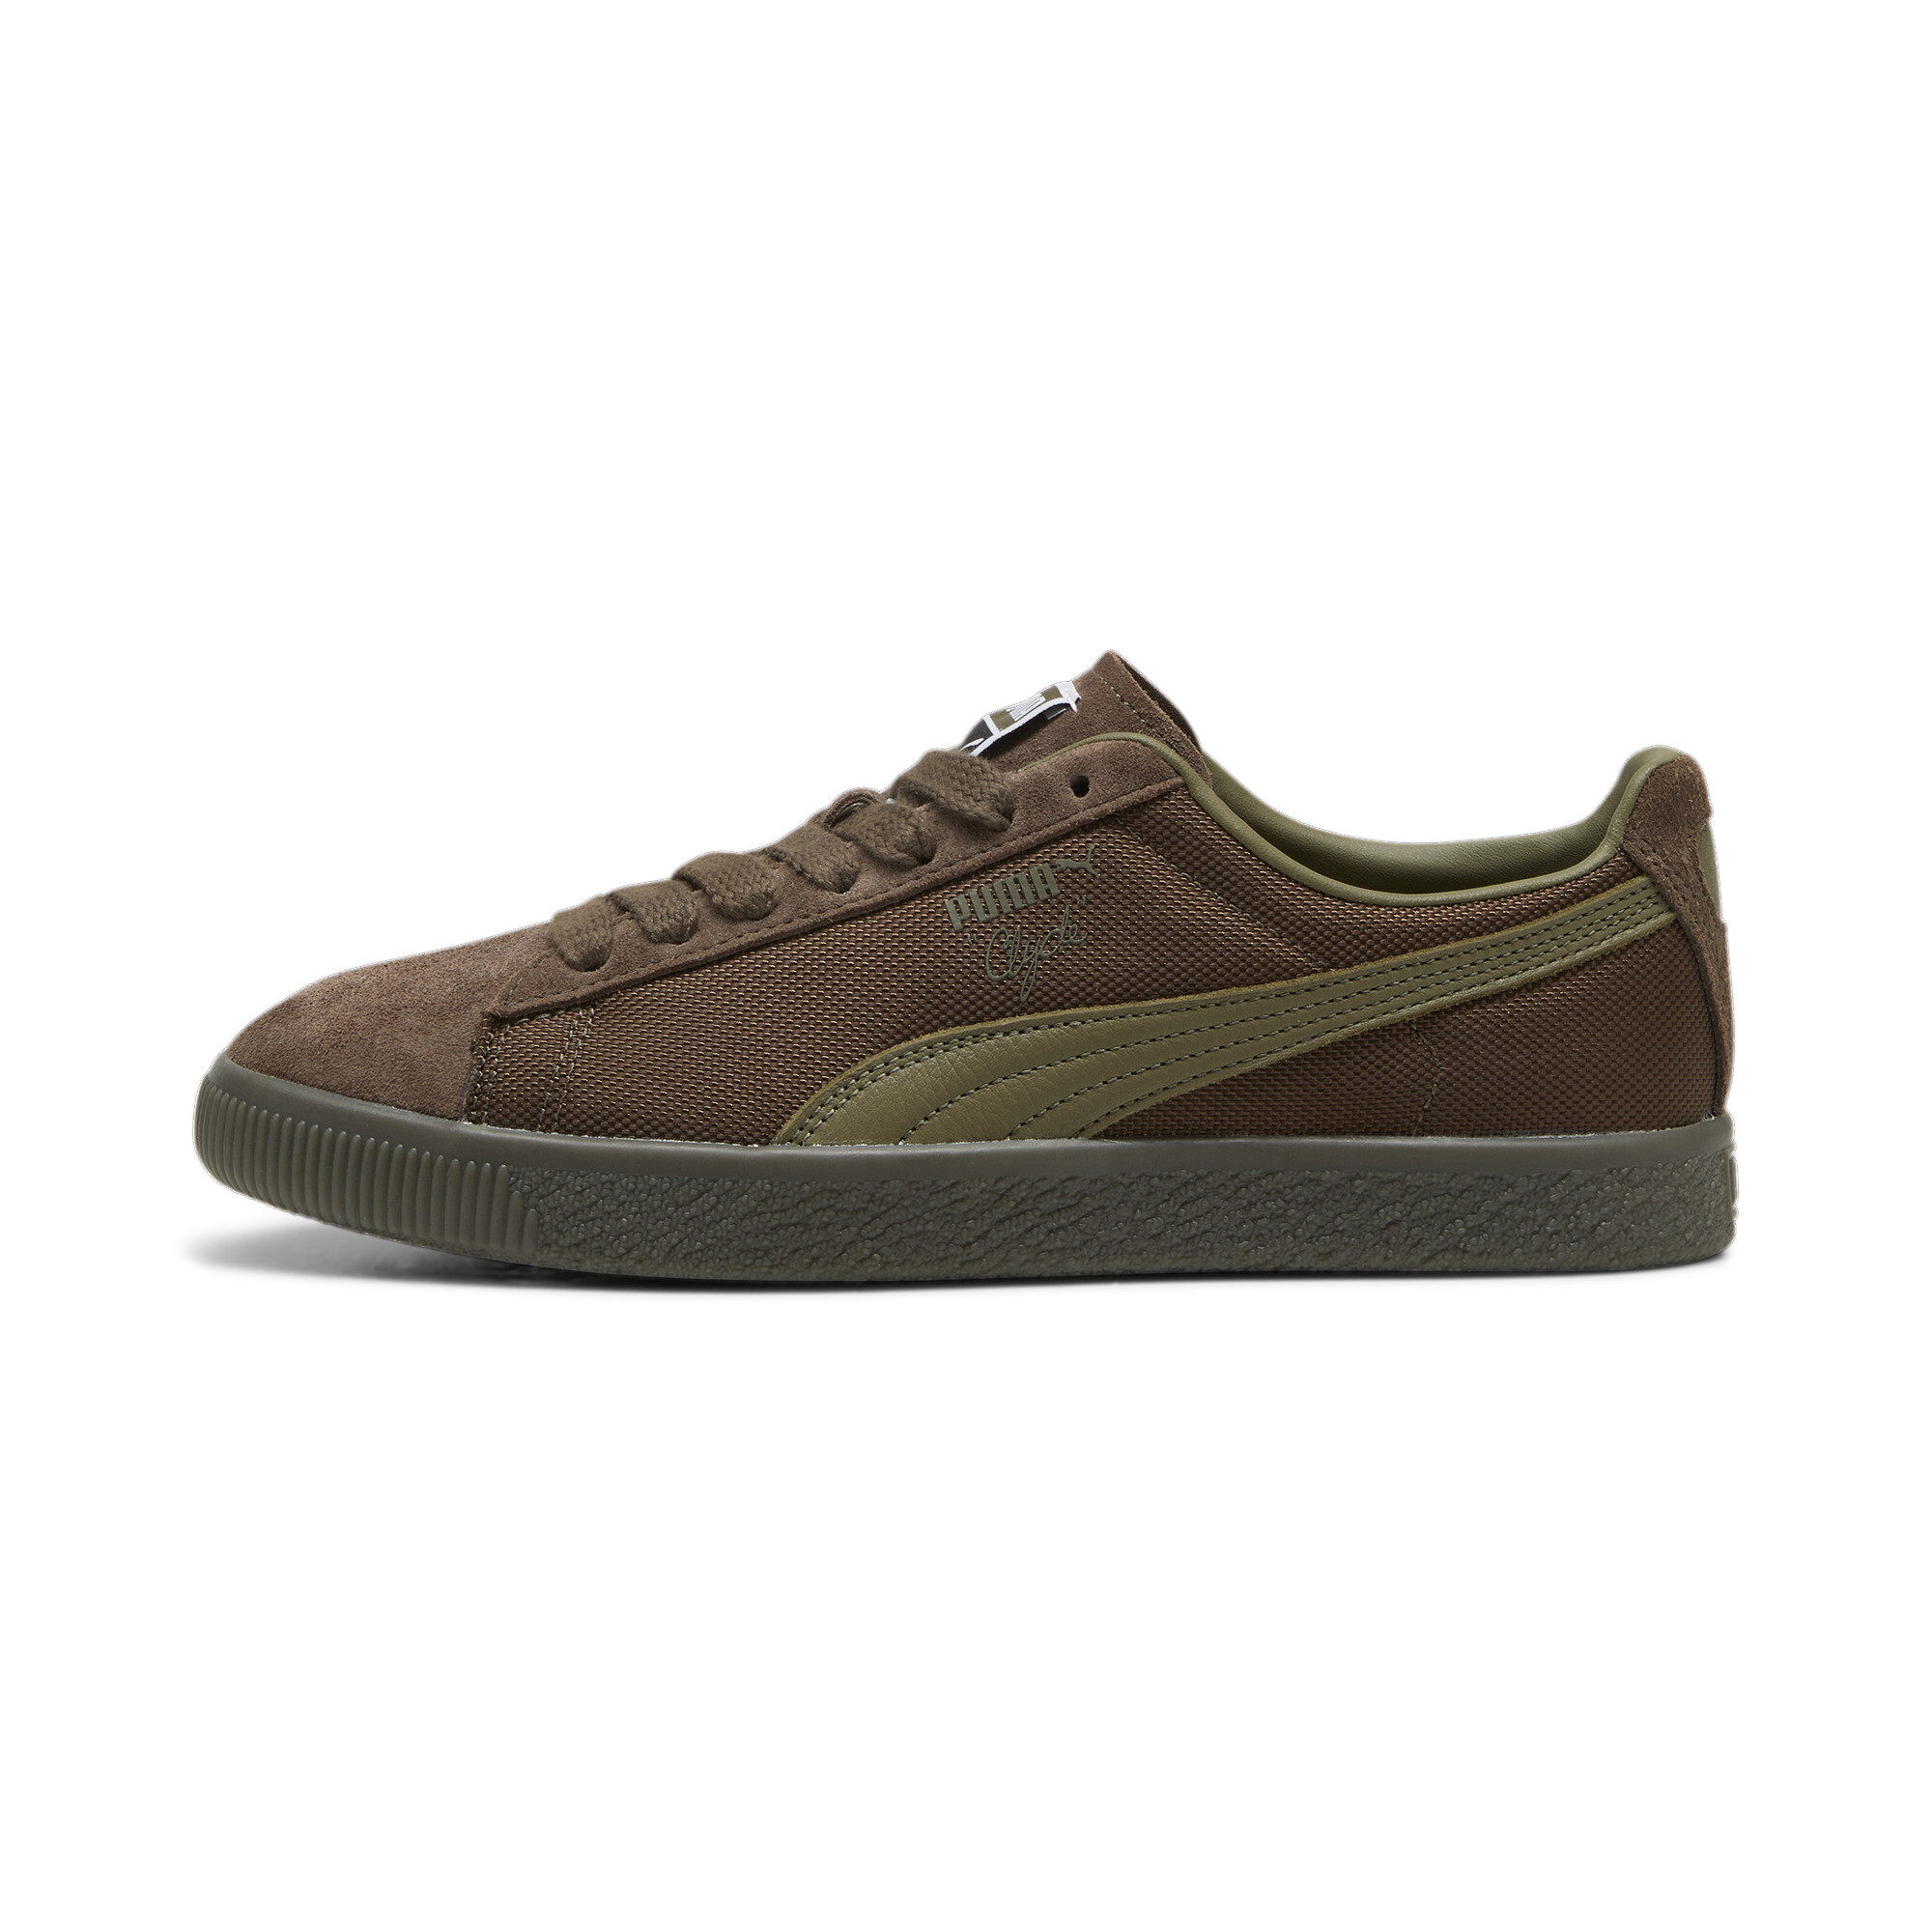 Puma Clyde Soph Sneakers, Brown, Size 46, Shoes